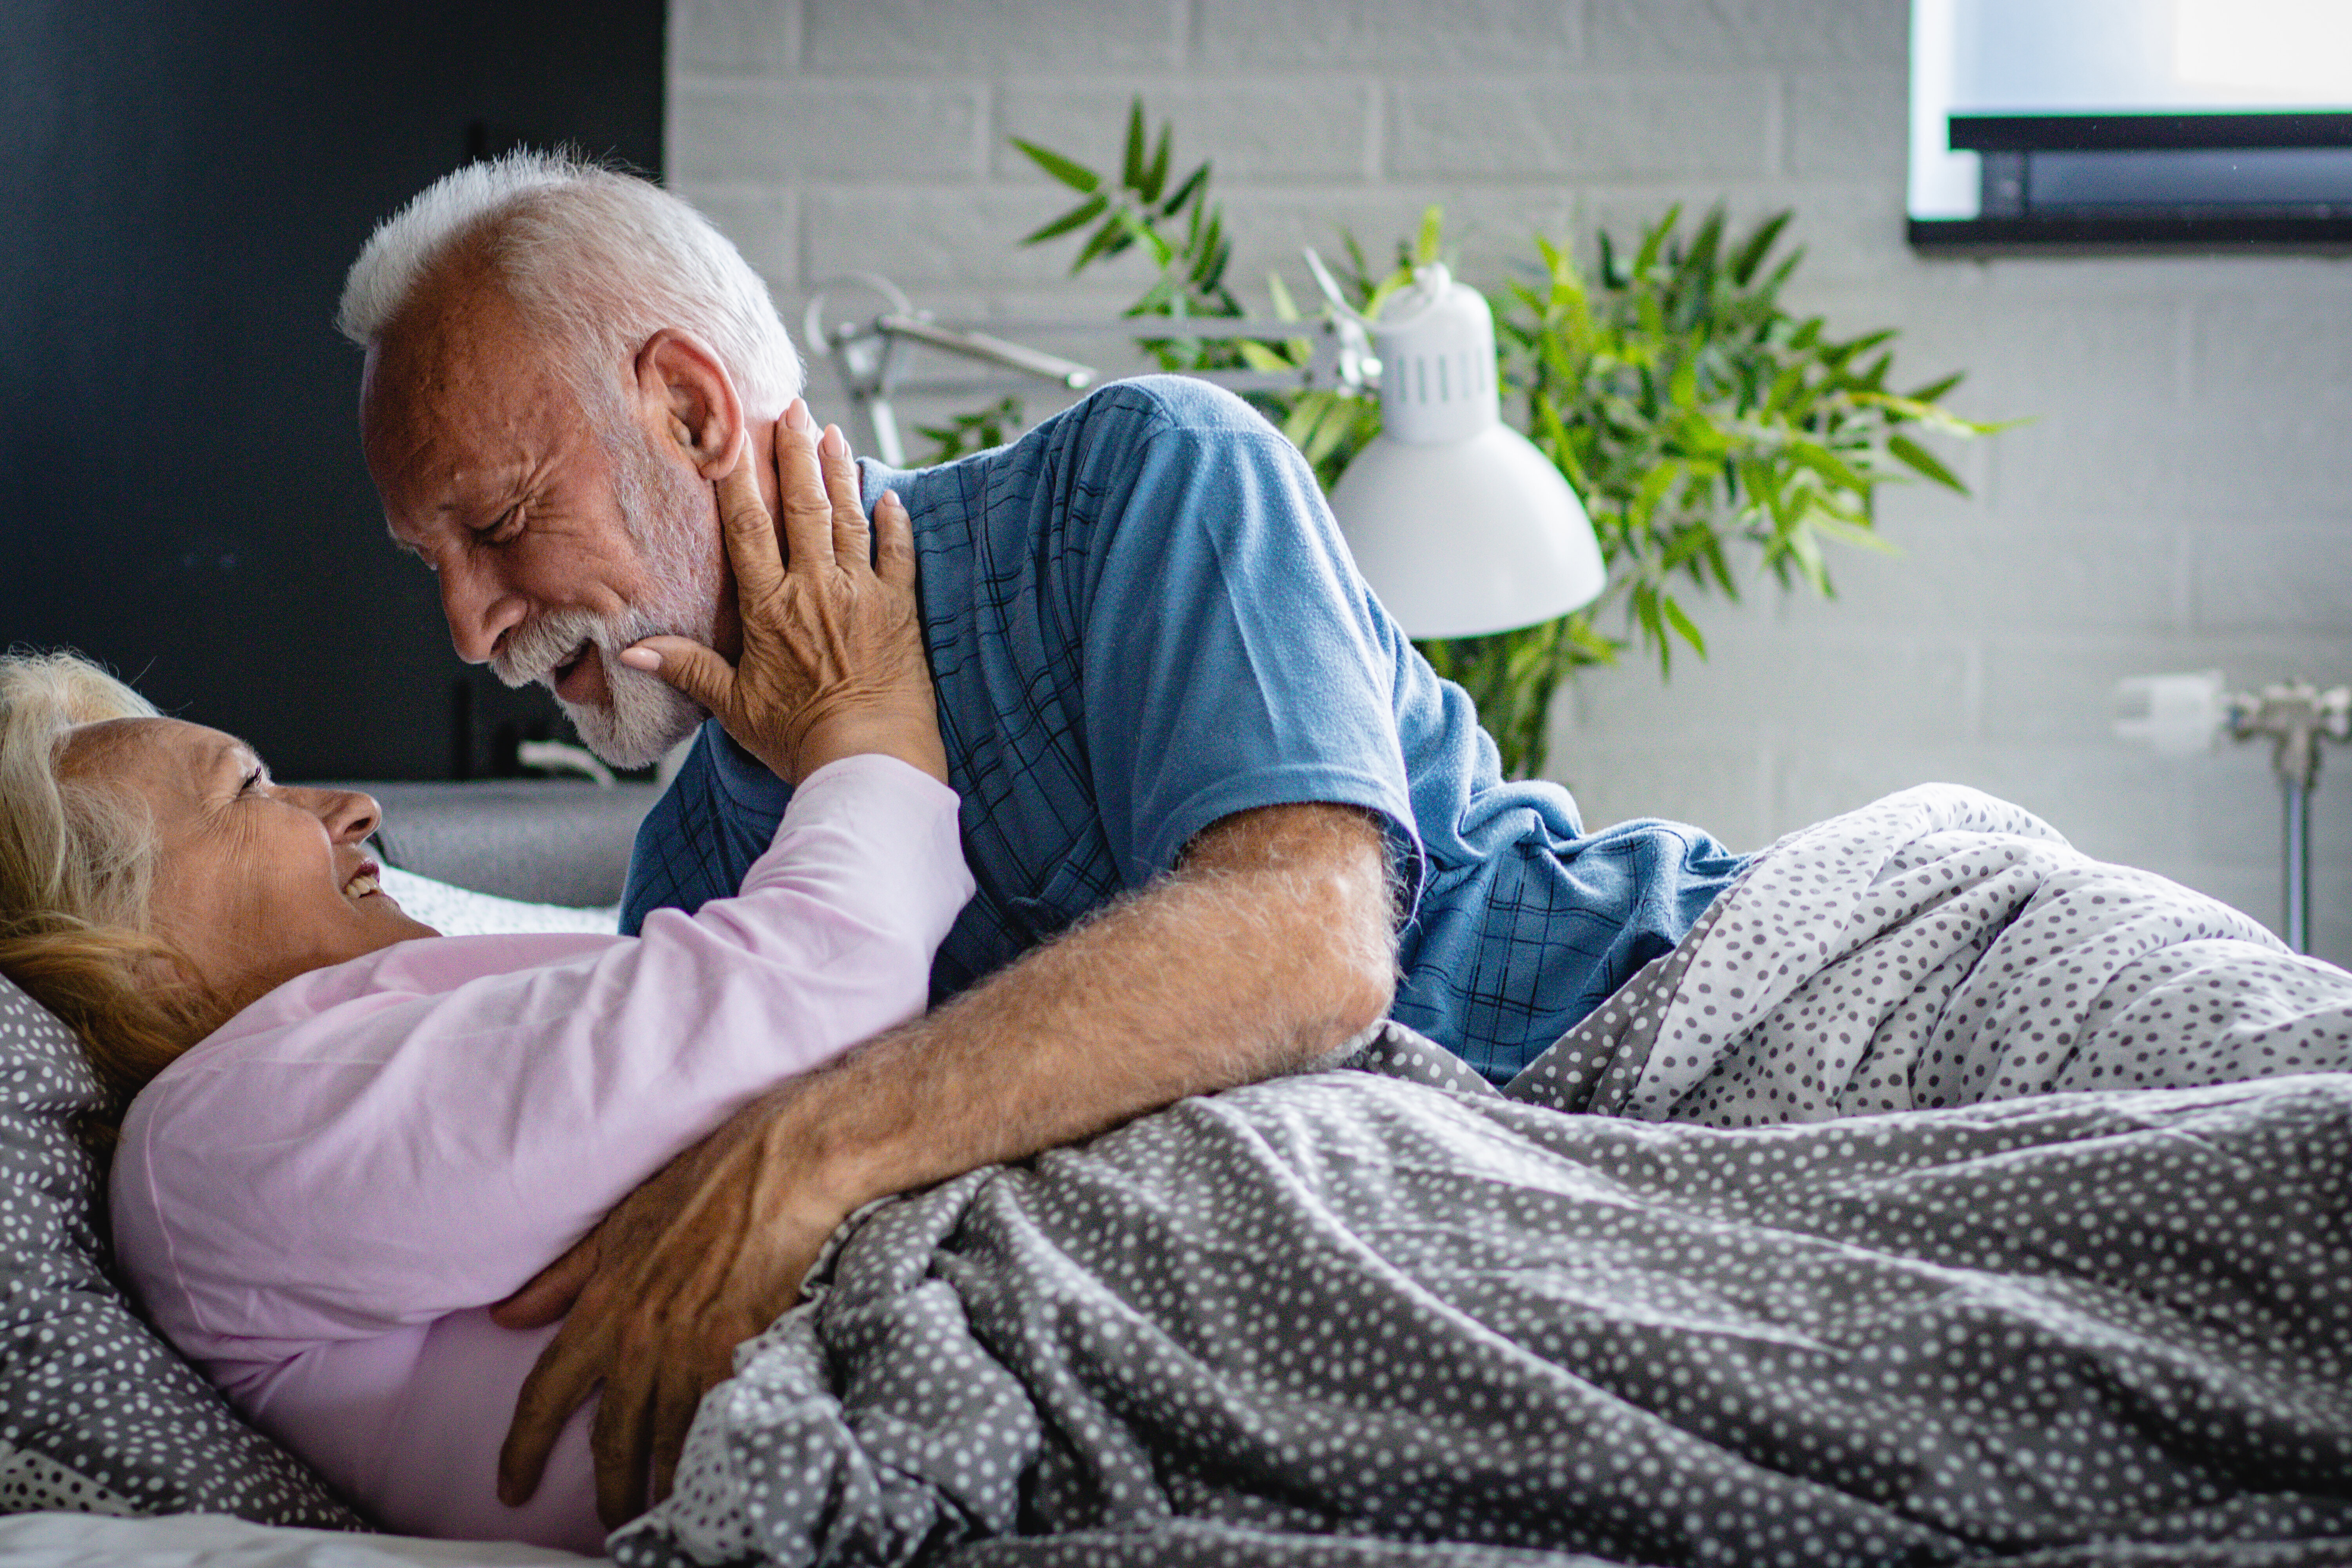 Elderly couple sharing an affectionate moment in bed, smiling and embracing